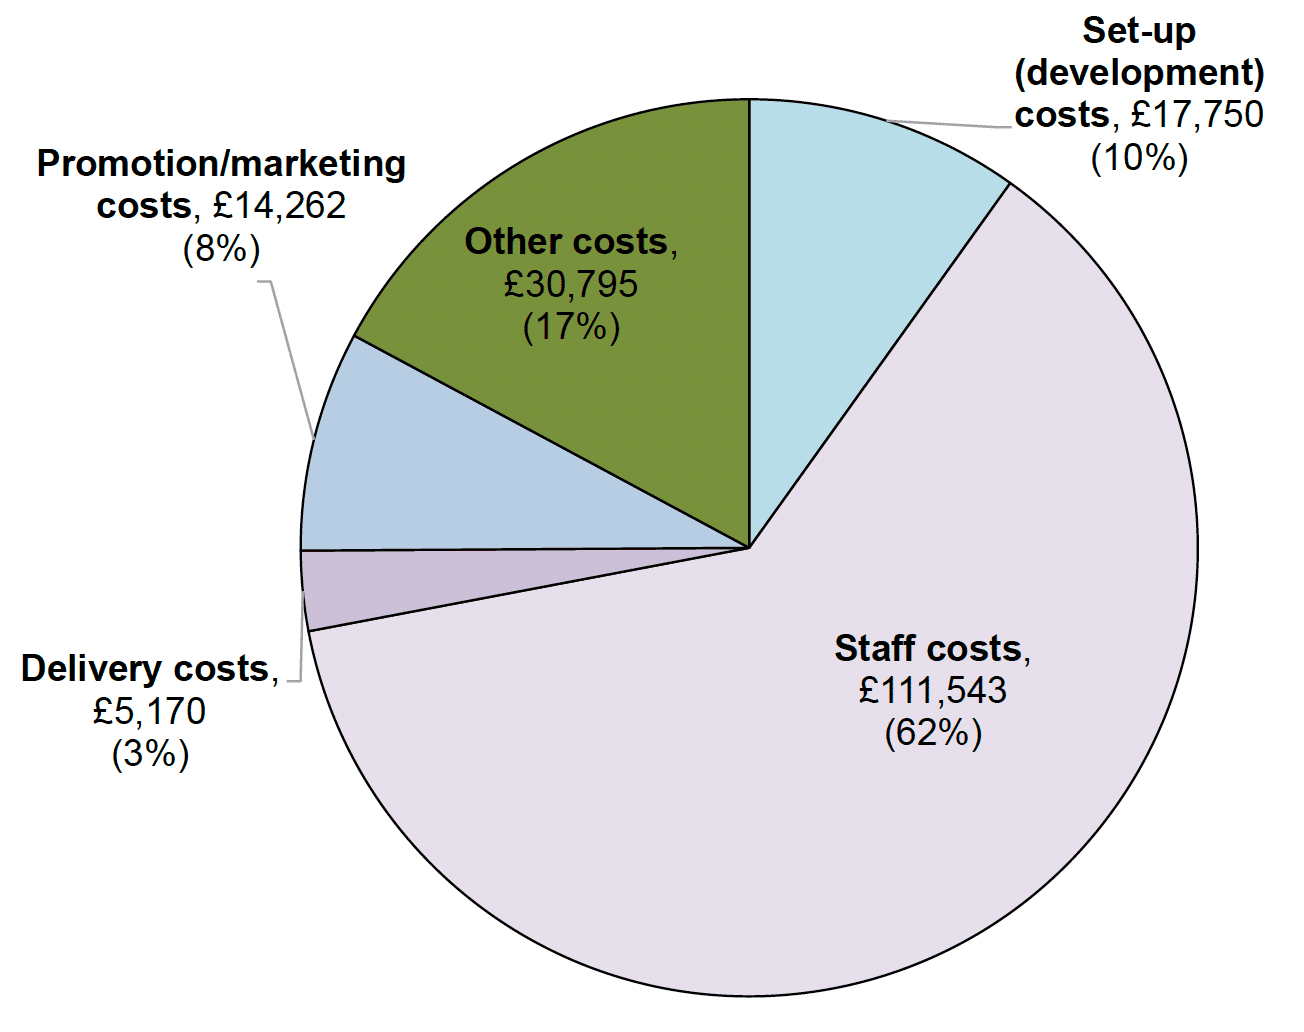 62% of spend was on staff; 10% was on set up; 8% was on promotion and 17% was on other costs.